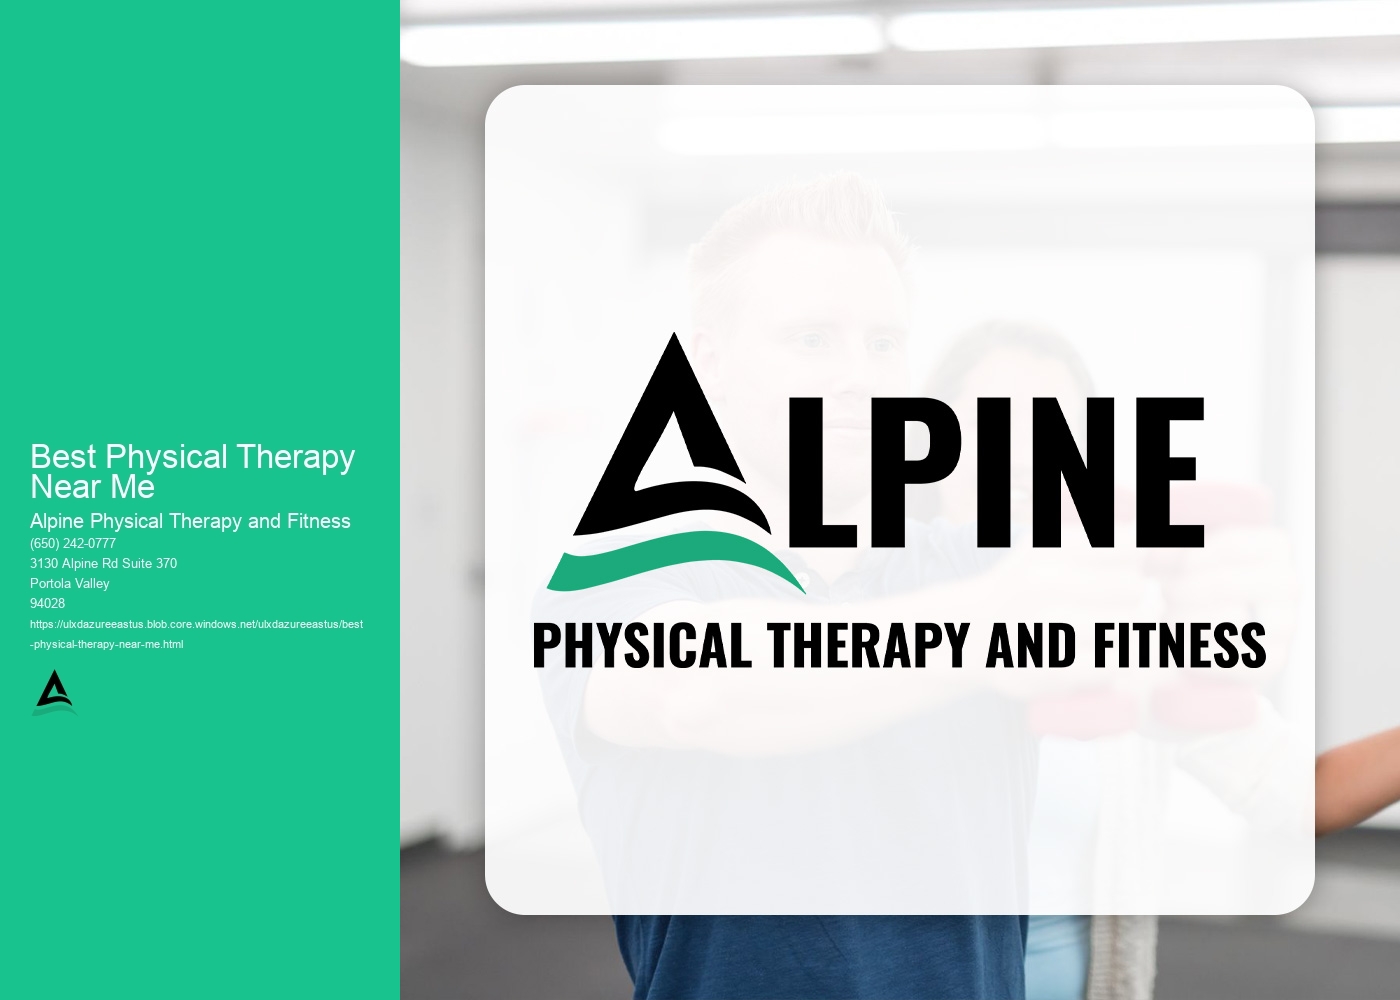 What are the benefits of manual therapy and soft tissue mobilization in physical therapy treatment plans?